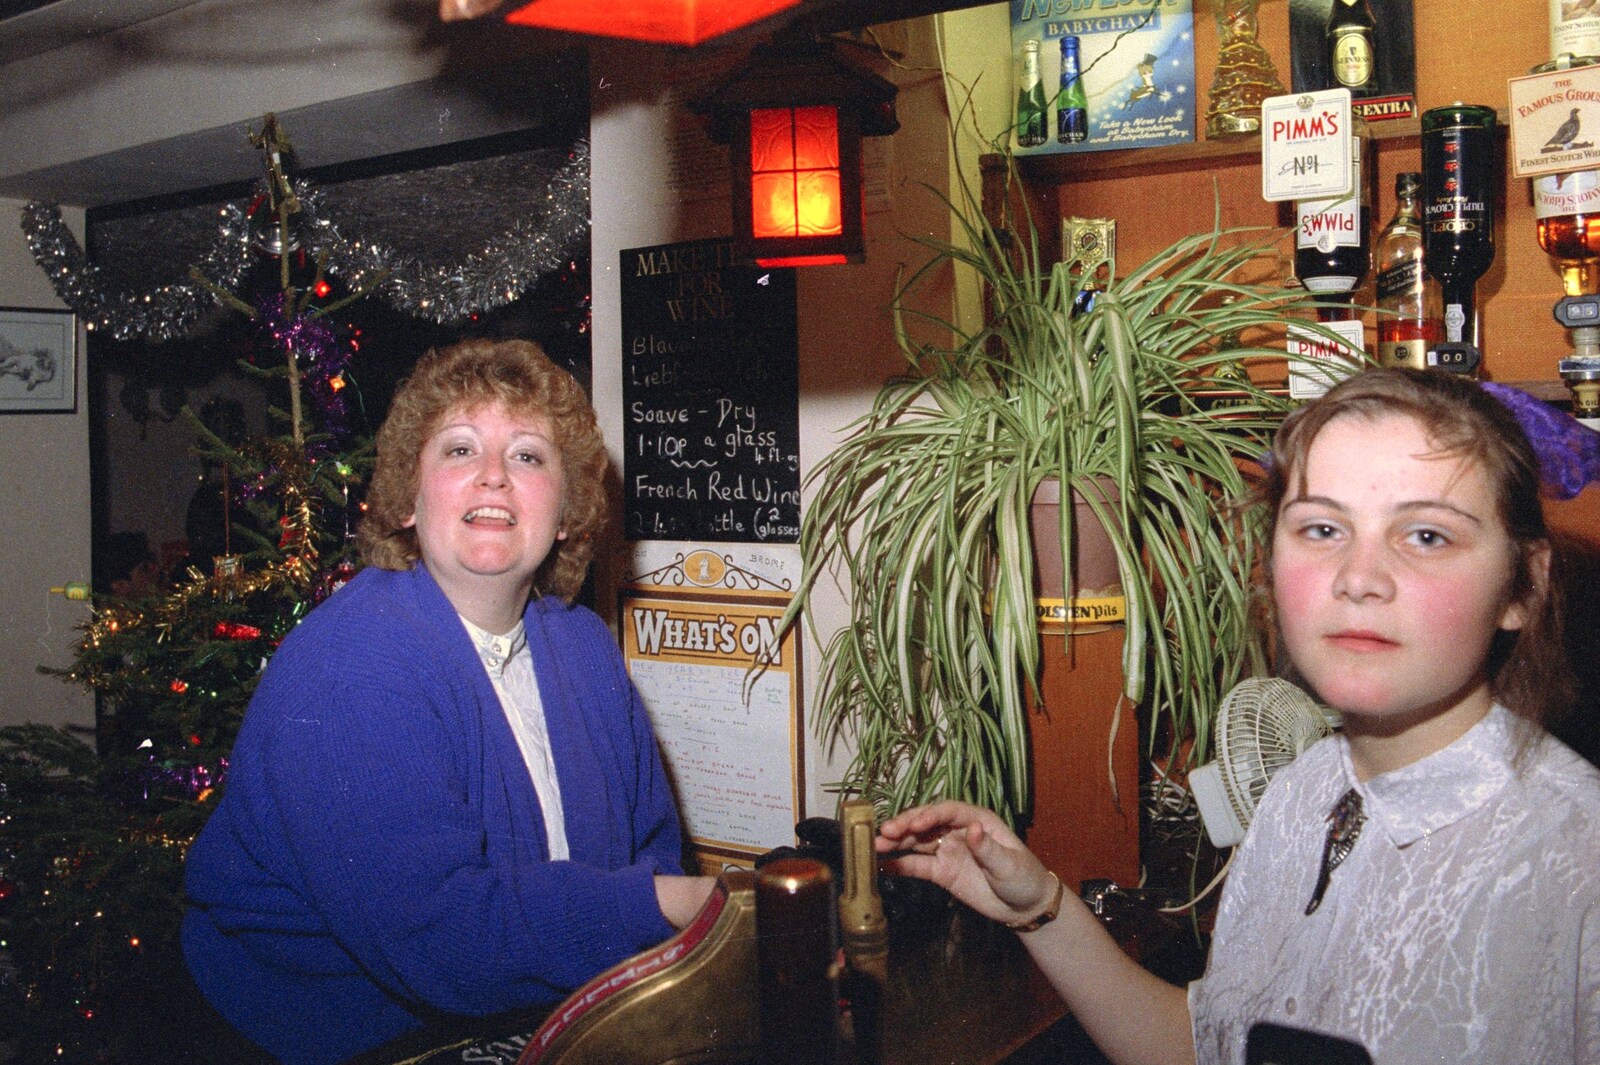 The darts team captain, and Claire from New Year's Eve at the Swan Inn, Brome, Suffolk - 31st December 1991